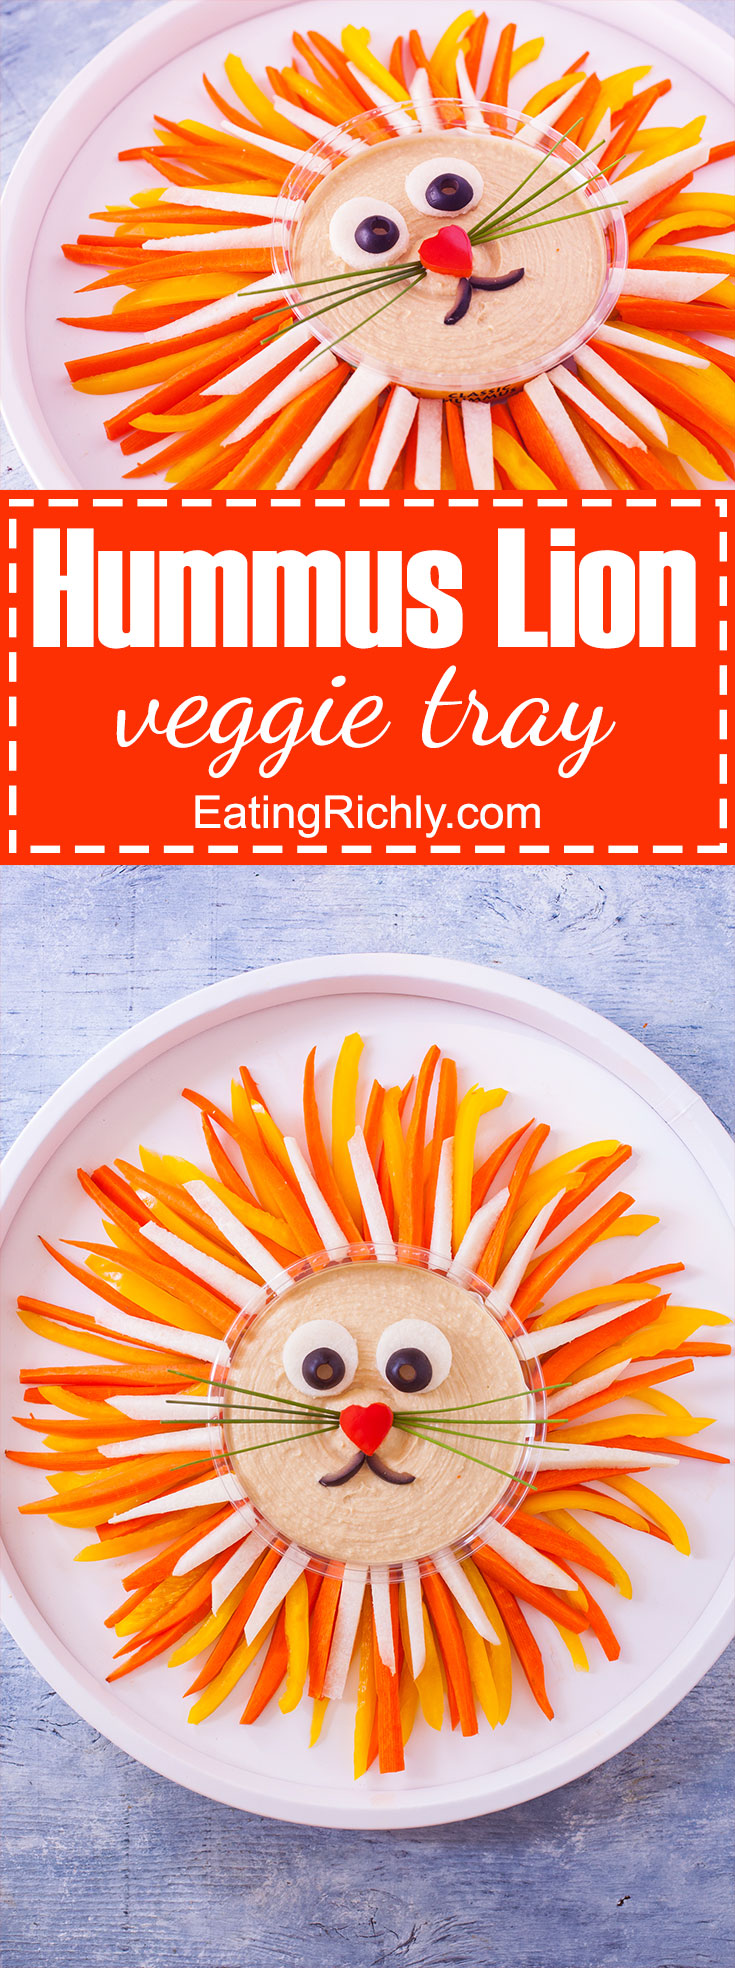 Kids and adults love this cute lion vegetable tray so much, they will stuff themselves on veggies without even realizing it! From EatingRichly.com